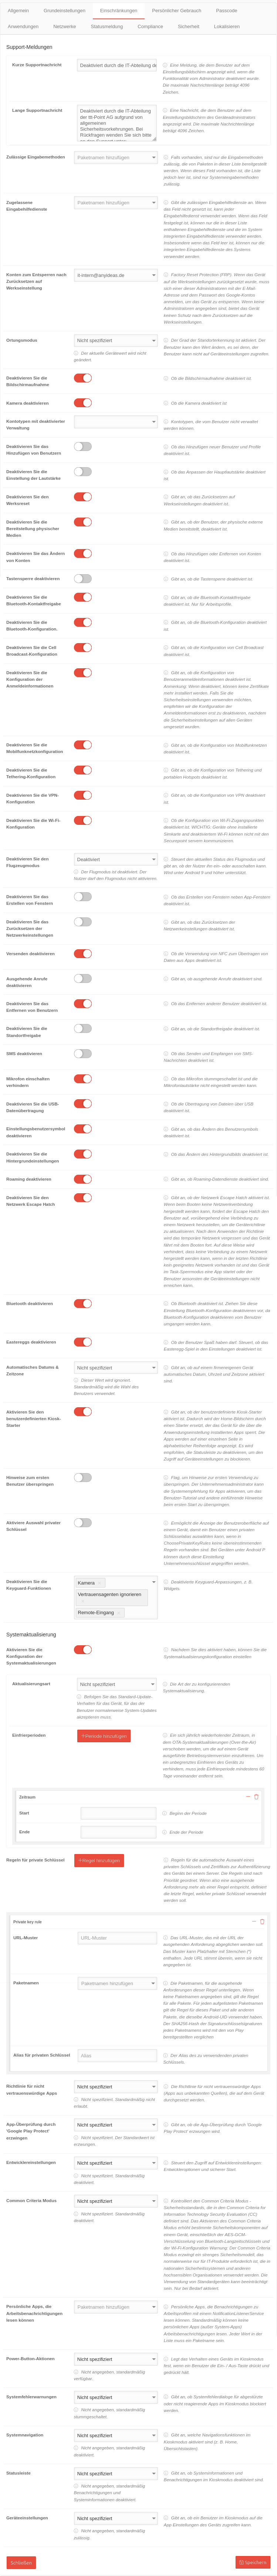 MS v1.18 Profile Android-emm Einschränkungen-full.png